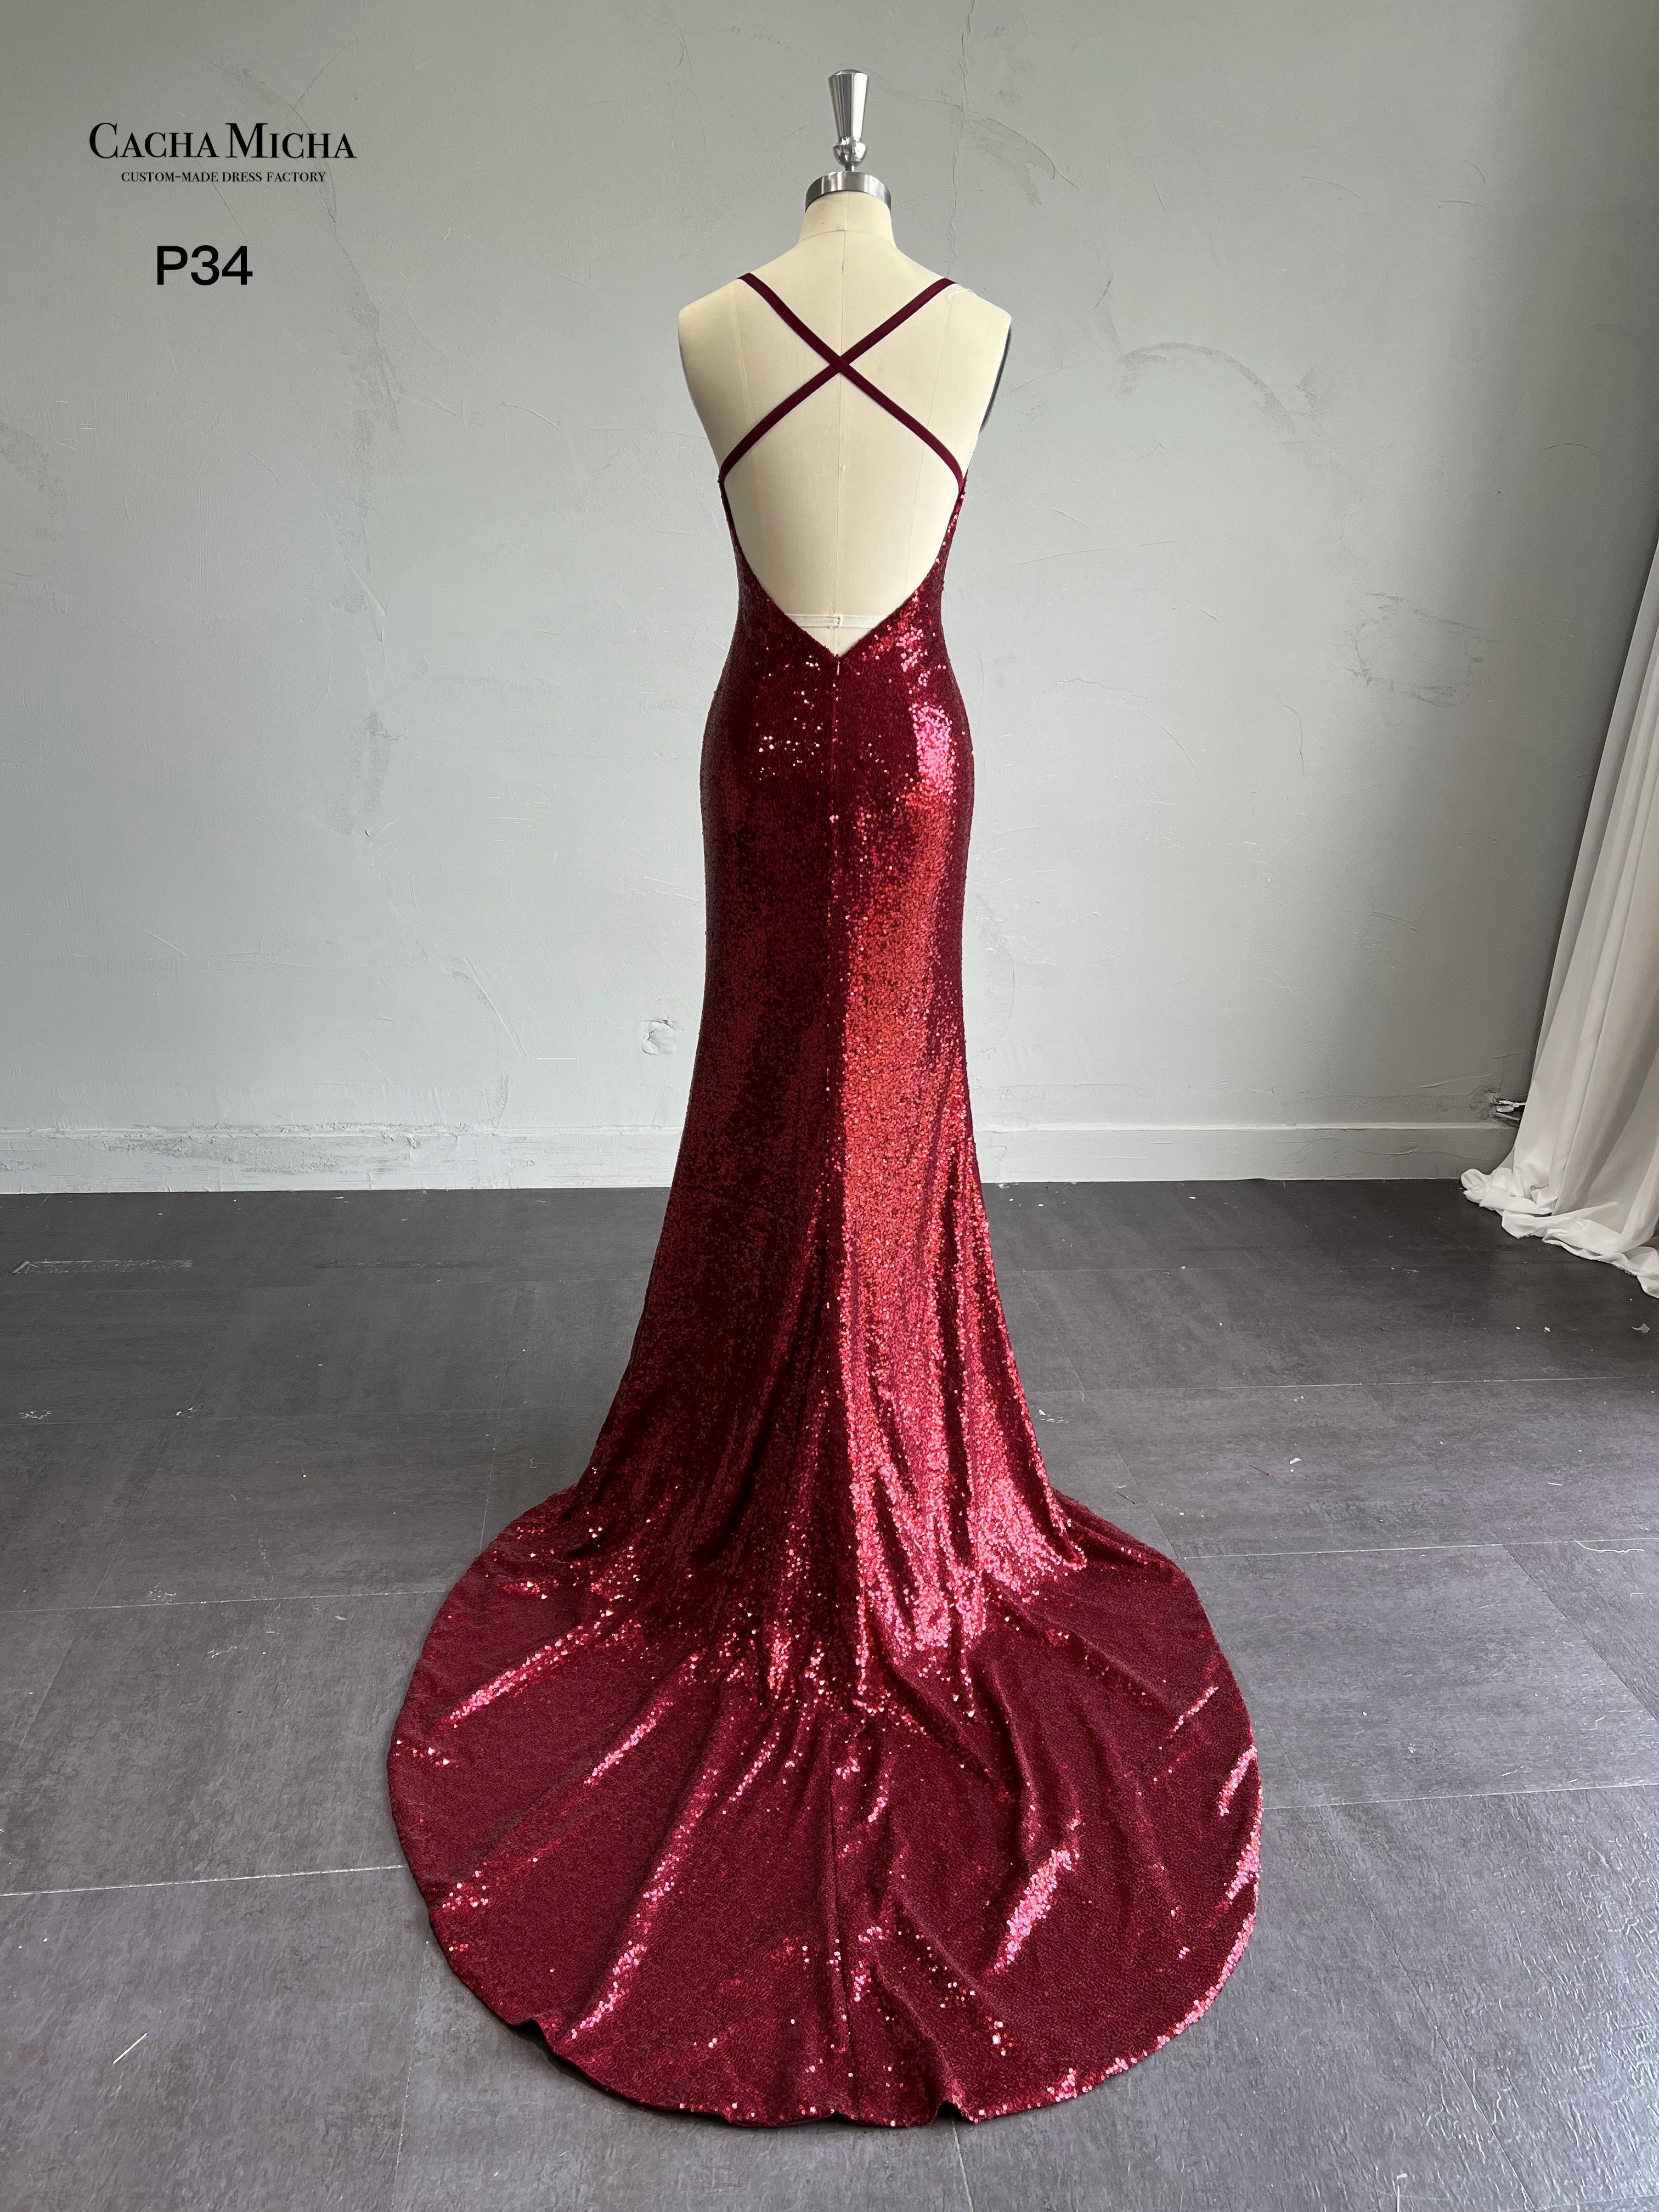 Sexy Backless Wine Red Sequin Mermaid Prom Dress P34